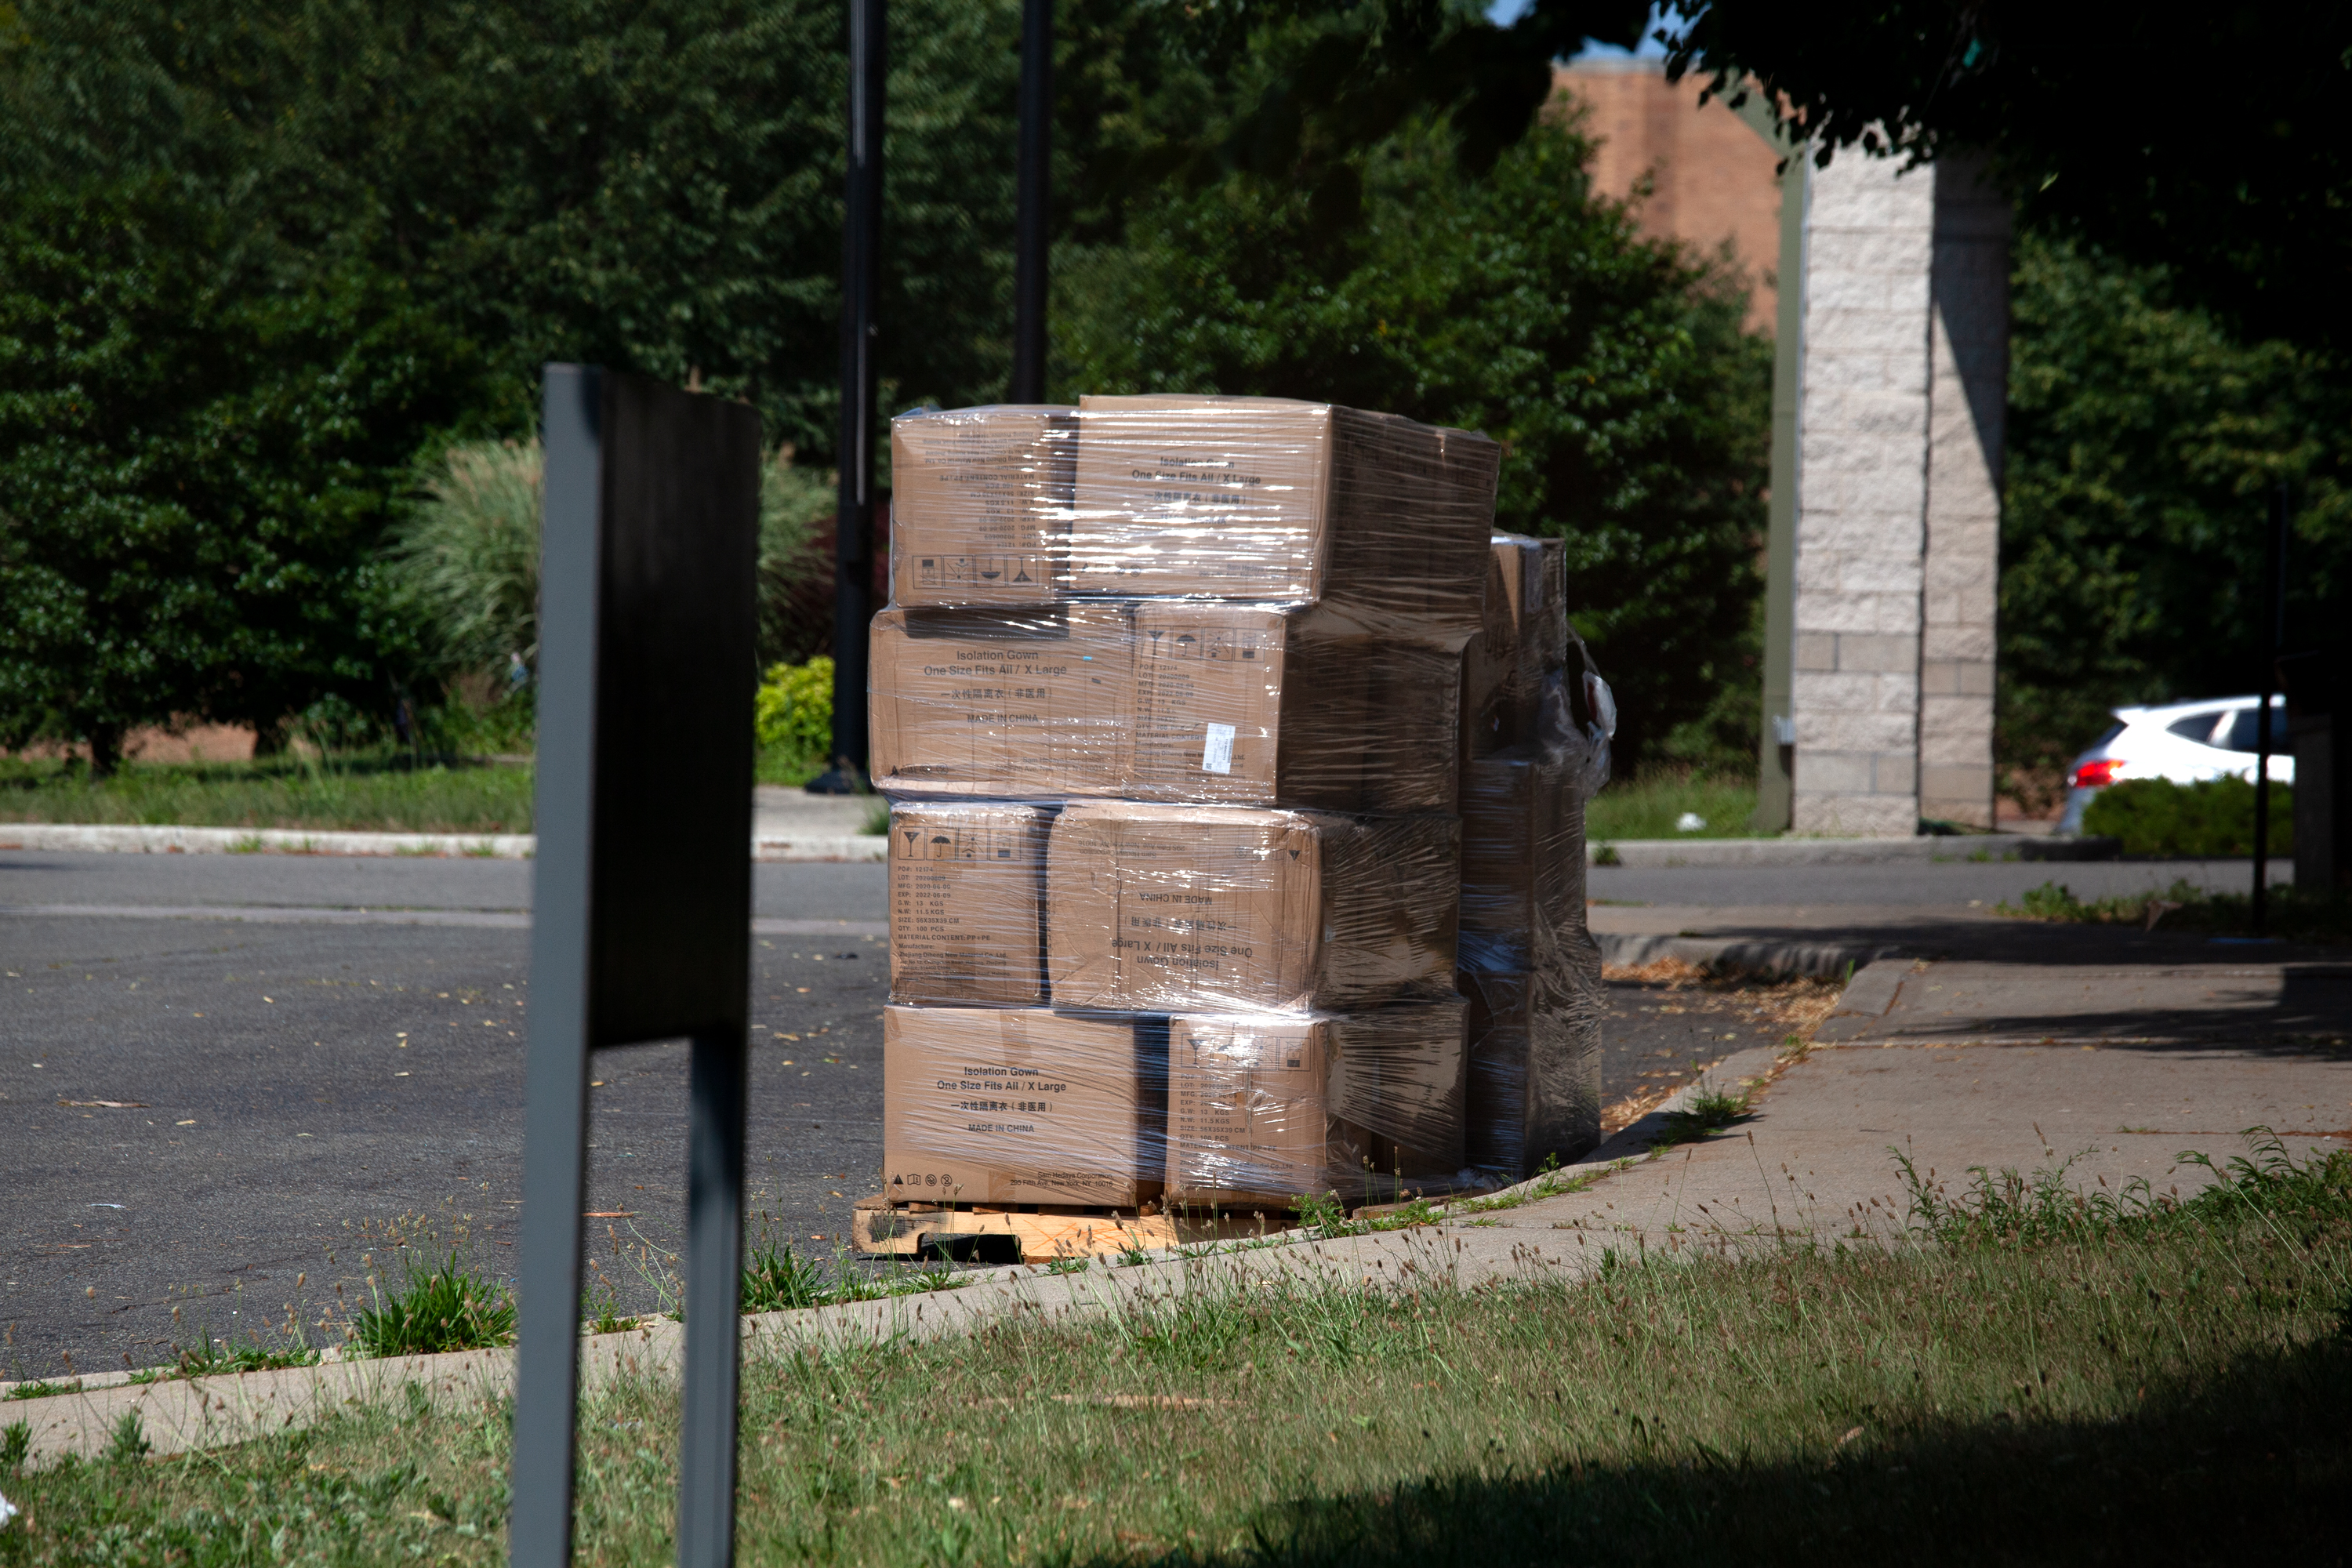 Boxes of protective equipment appeared to still be sitting outside a state-run nursing home for veterans in St. Albans, Queens on Tuesday, June 29, 2021.